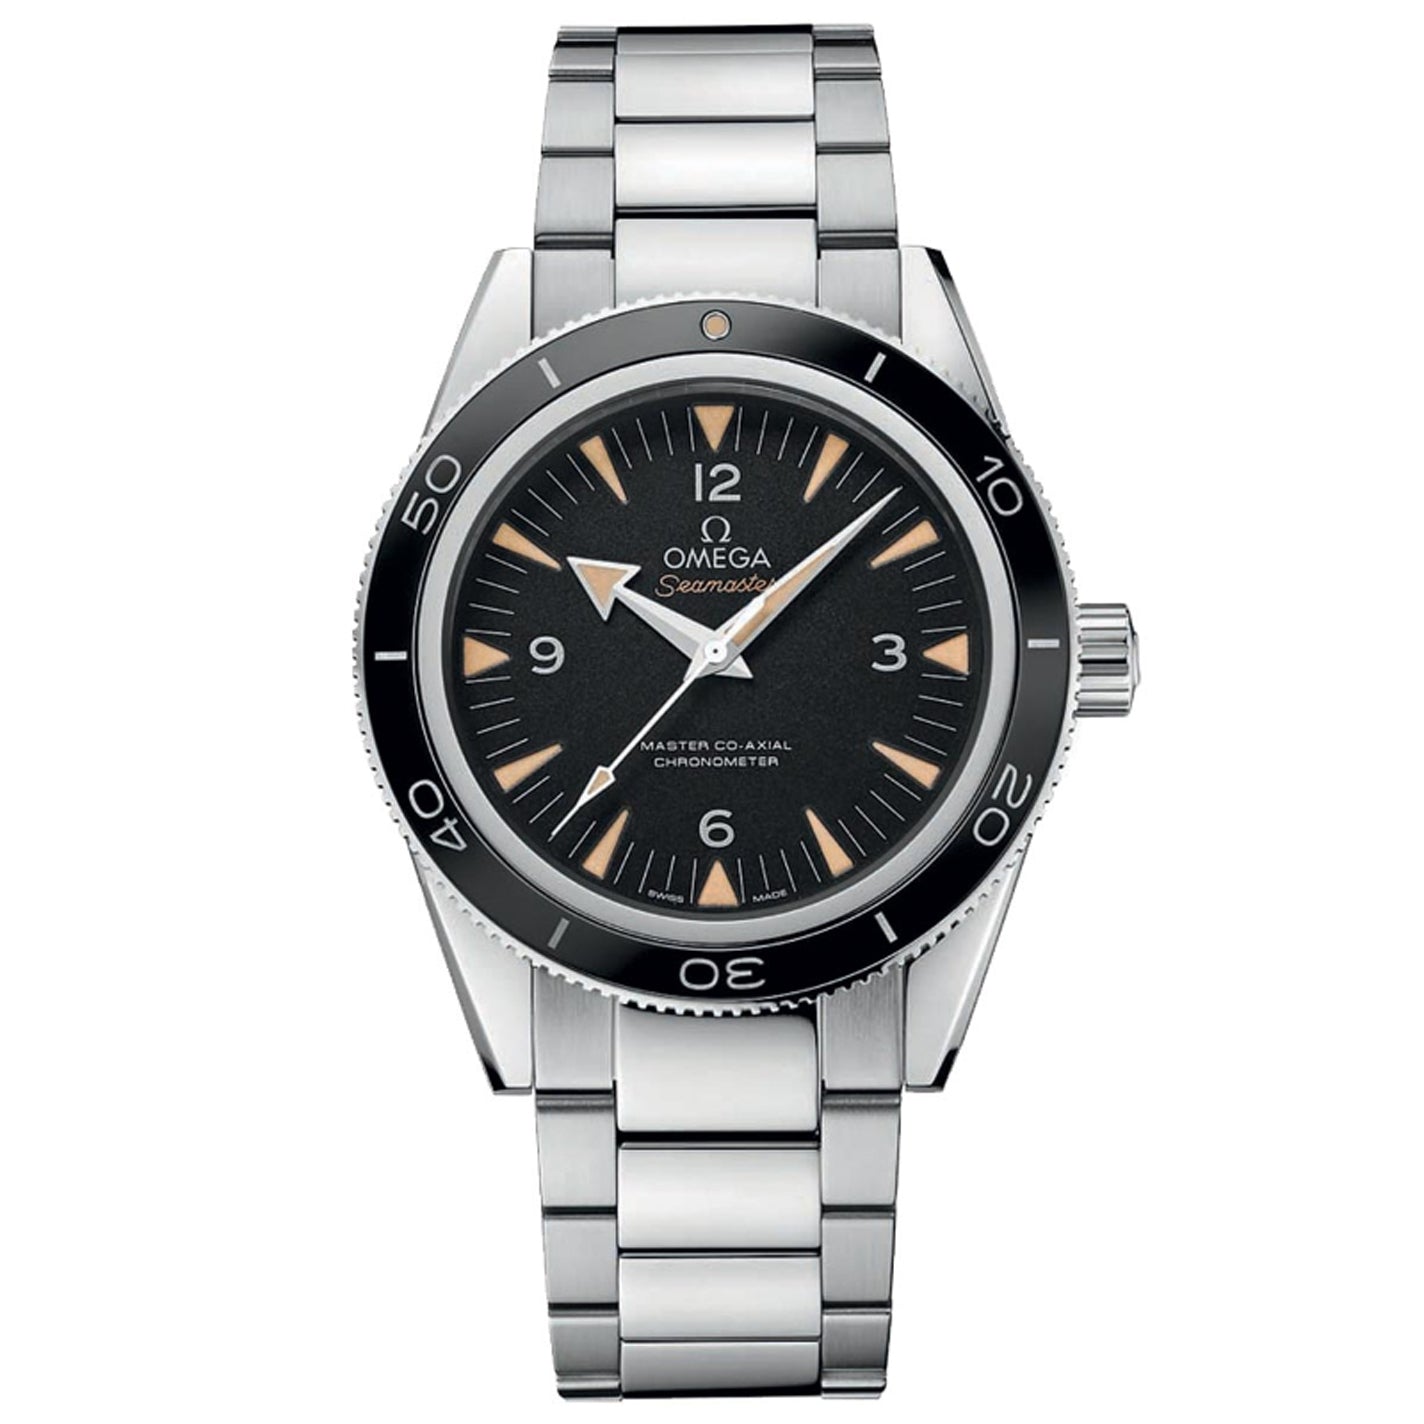 OMEGA Seamaster 300 Master Co-Axial Chronometer 41mm Watch